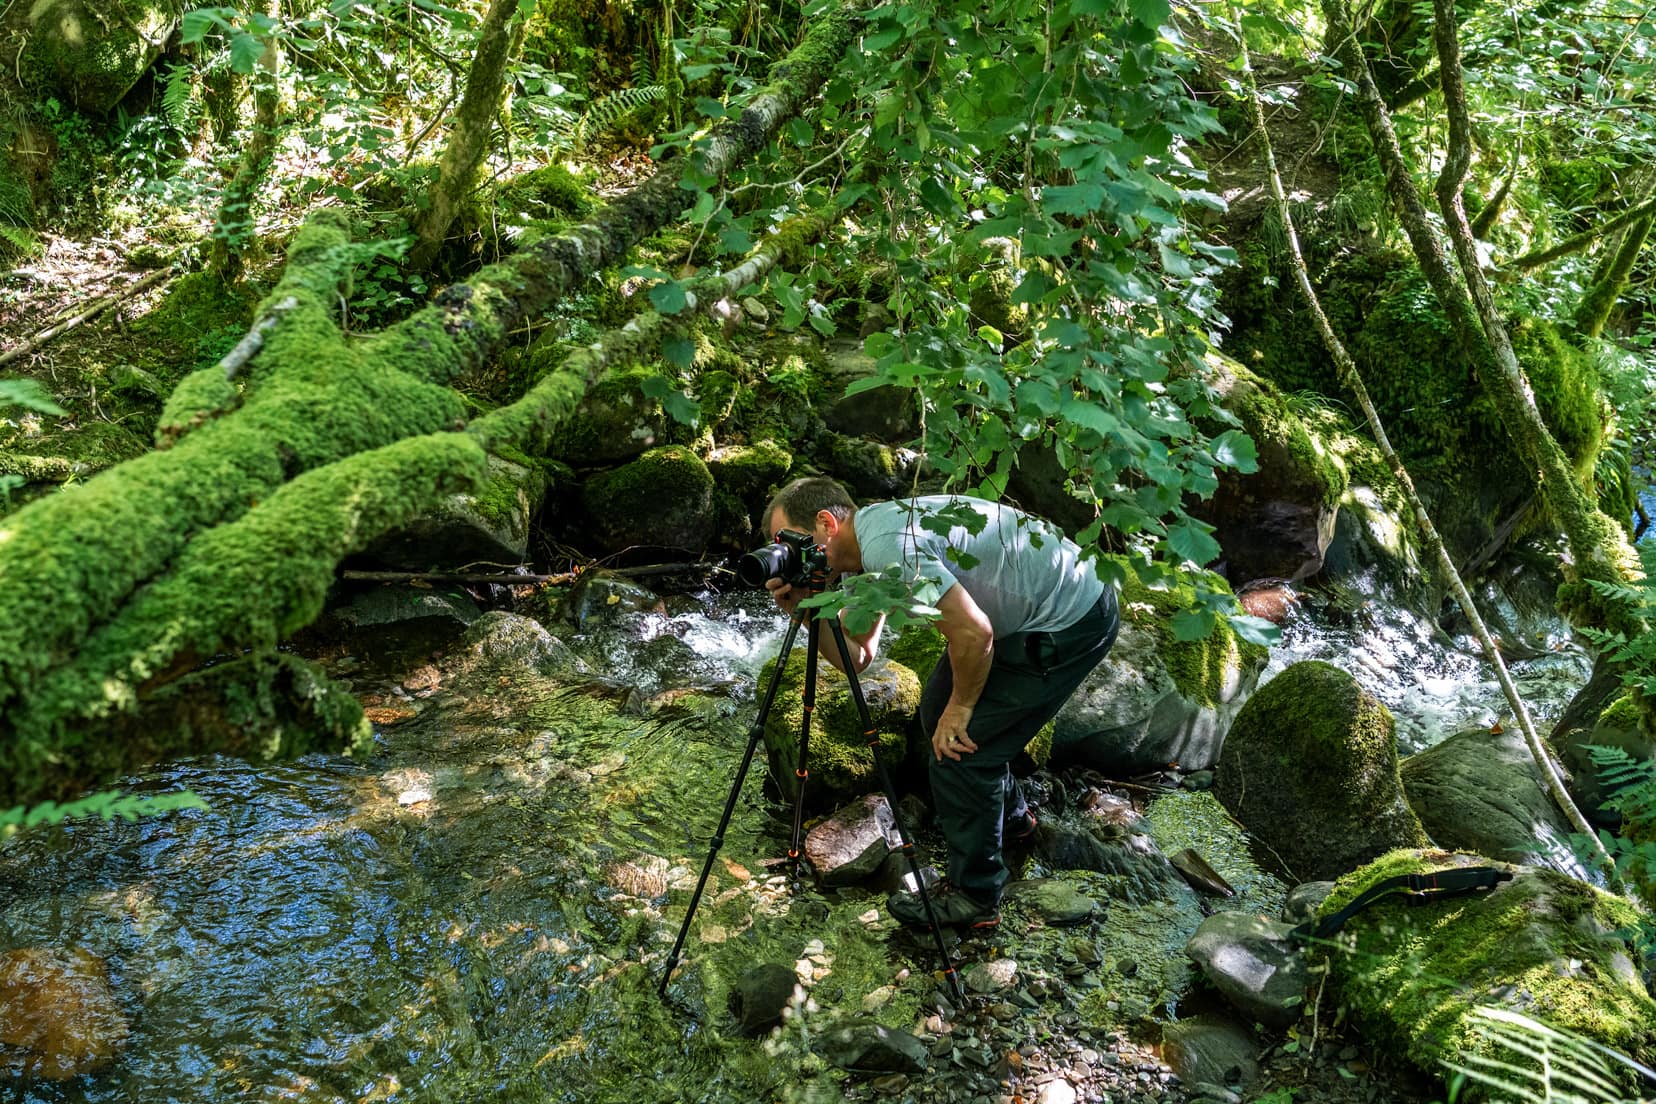 tripod-setup-in a stream with Lars taking a photo